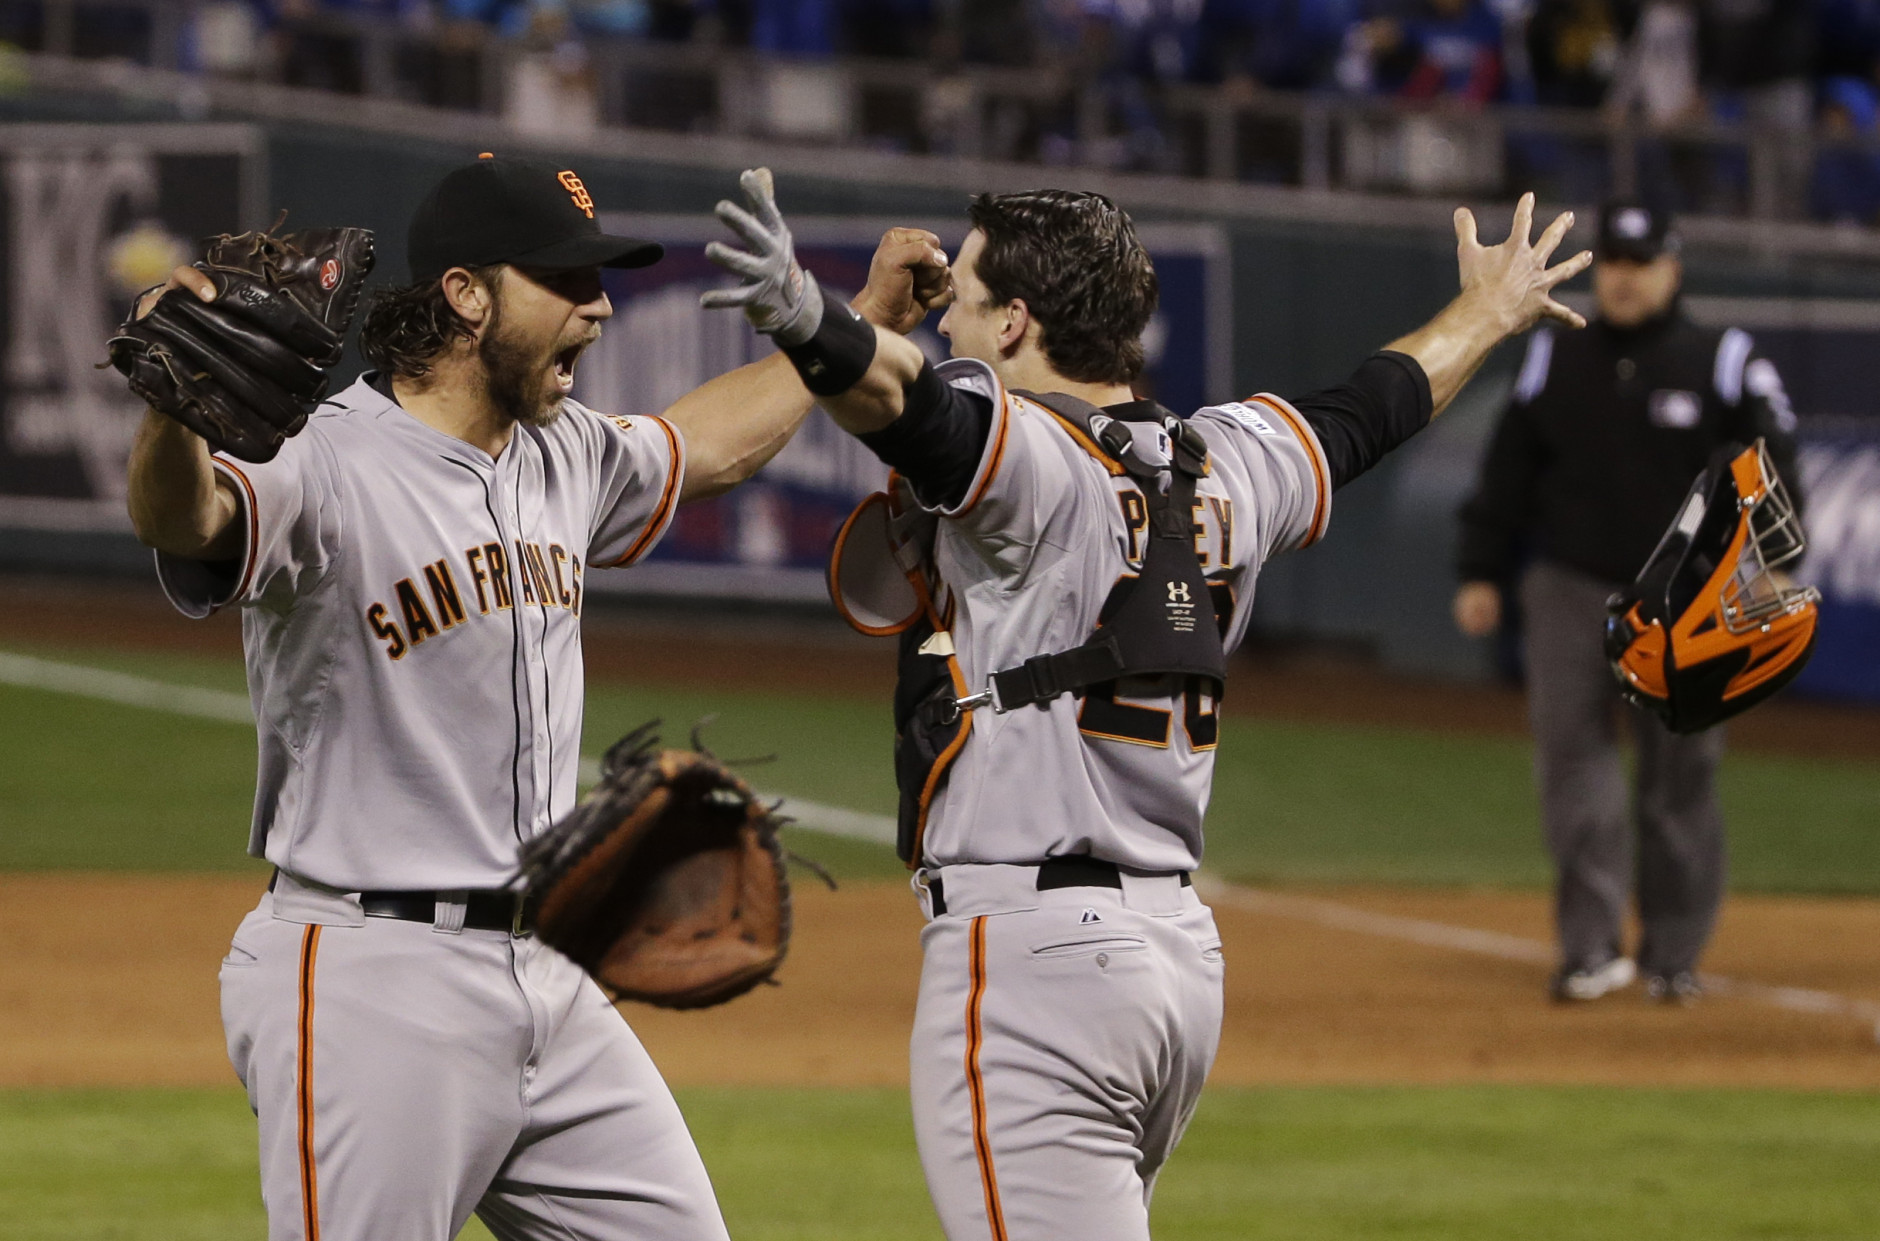 FILE - In this Oct. 29, 2014, file photo, San Francisco Giants pitcher Madison Bumgarner, left, and Buster Posey celebrate after winning 3-2 to win the series over Kansas City Royals after Game 7 of baseball's World Series in Kansas City, Mo. (AP Photo/Matt Slocum, File)